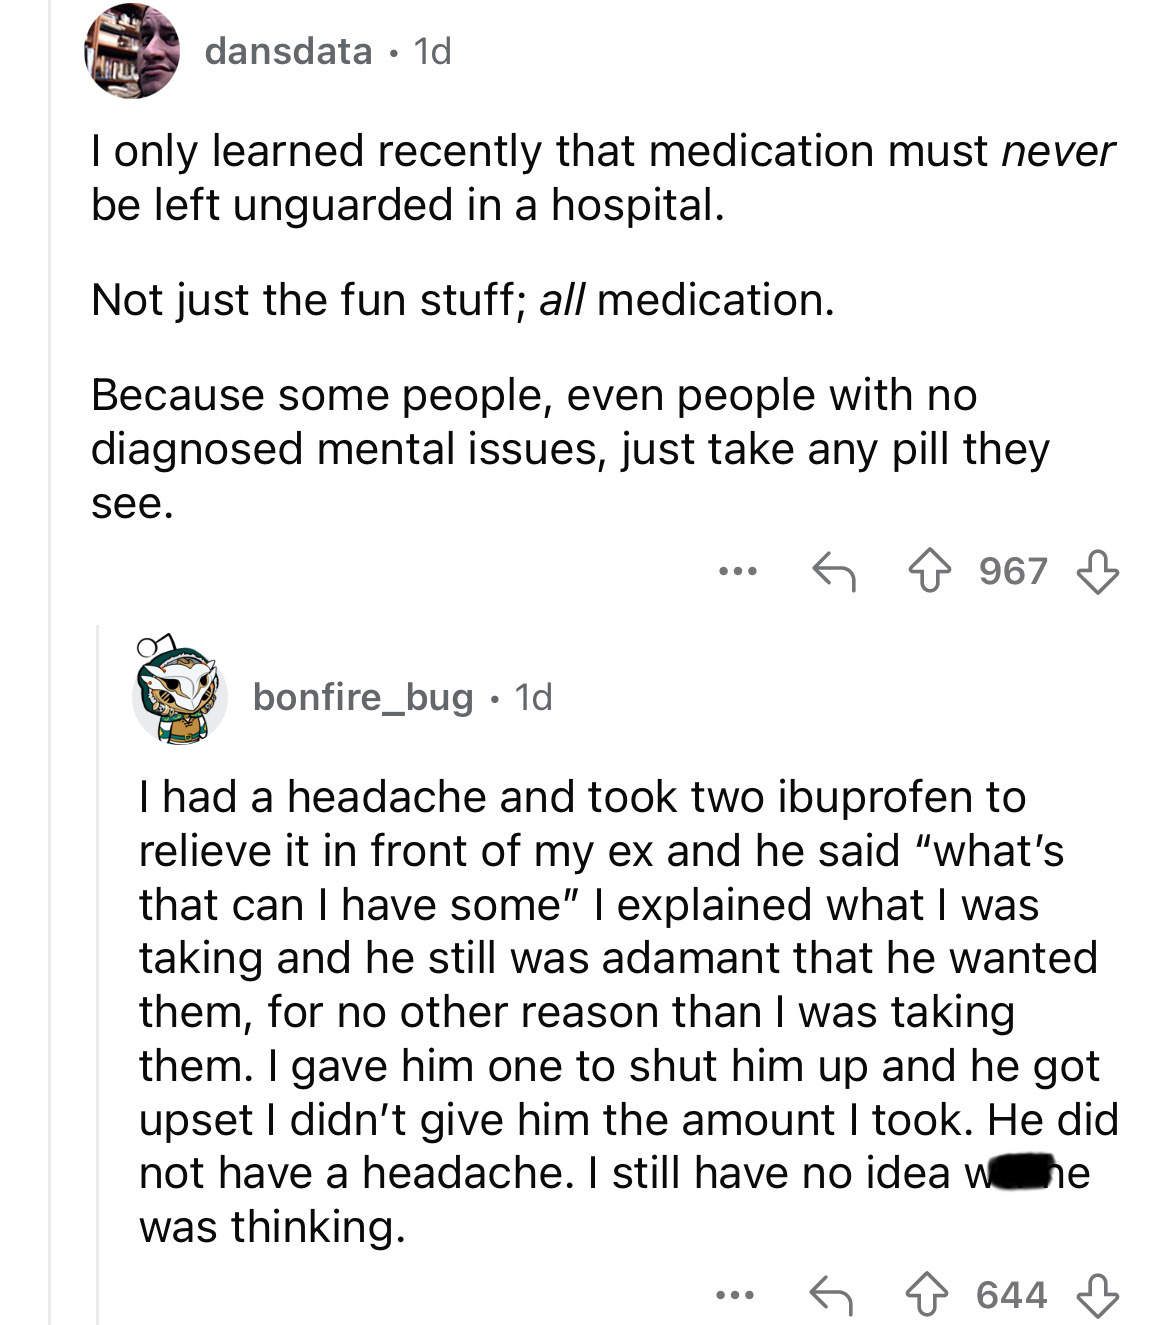 screenshot - dansdata 1d I only learned recently that medication must never be left unguarded in a hospital. Not just the fun stuff; all medication. Because some people, even people with no diagnosed mental issues, just take any pill they see. ... 967 bon